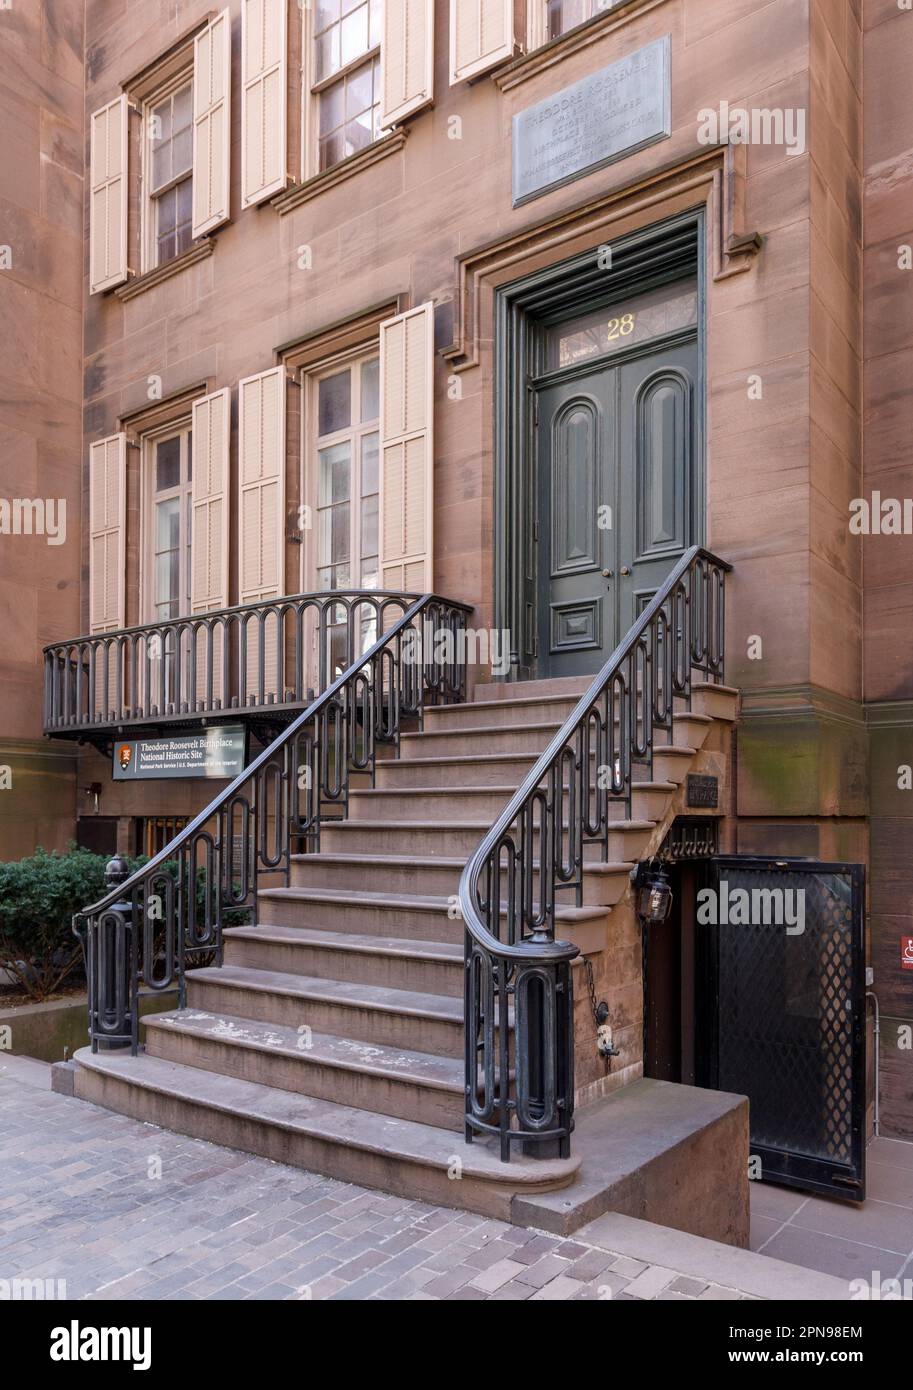 Theodore Roosevelt Birthplace National Historic Site, Ladies' Mile District, New York City Stock Photo